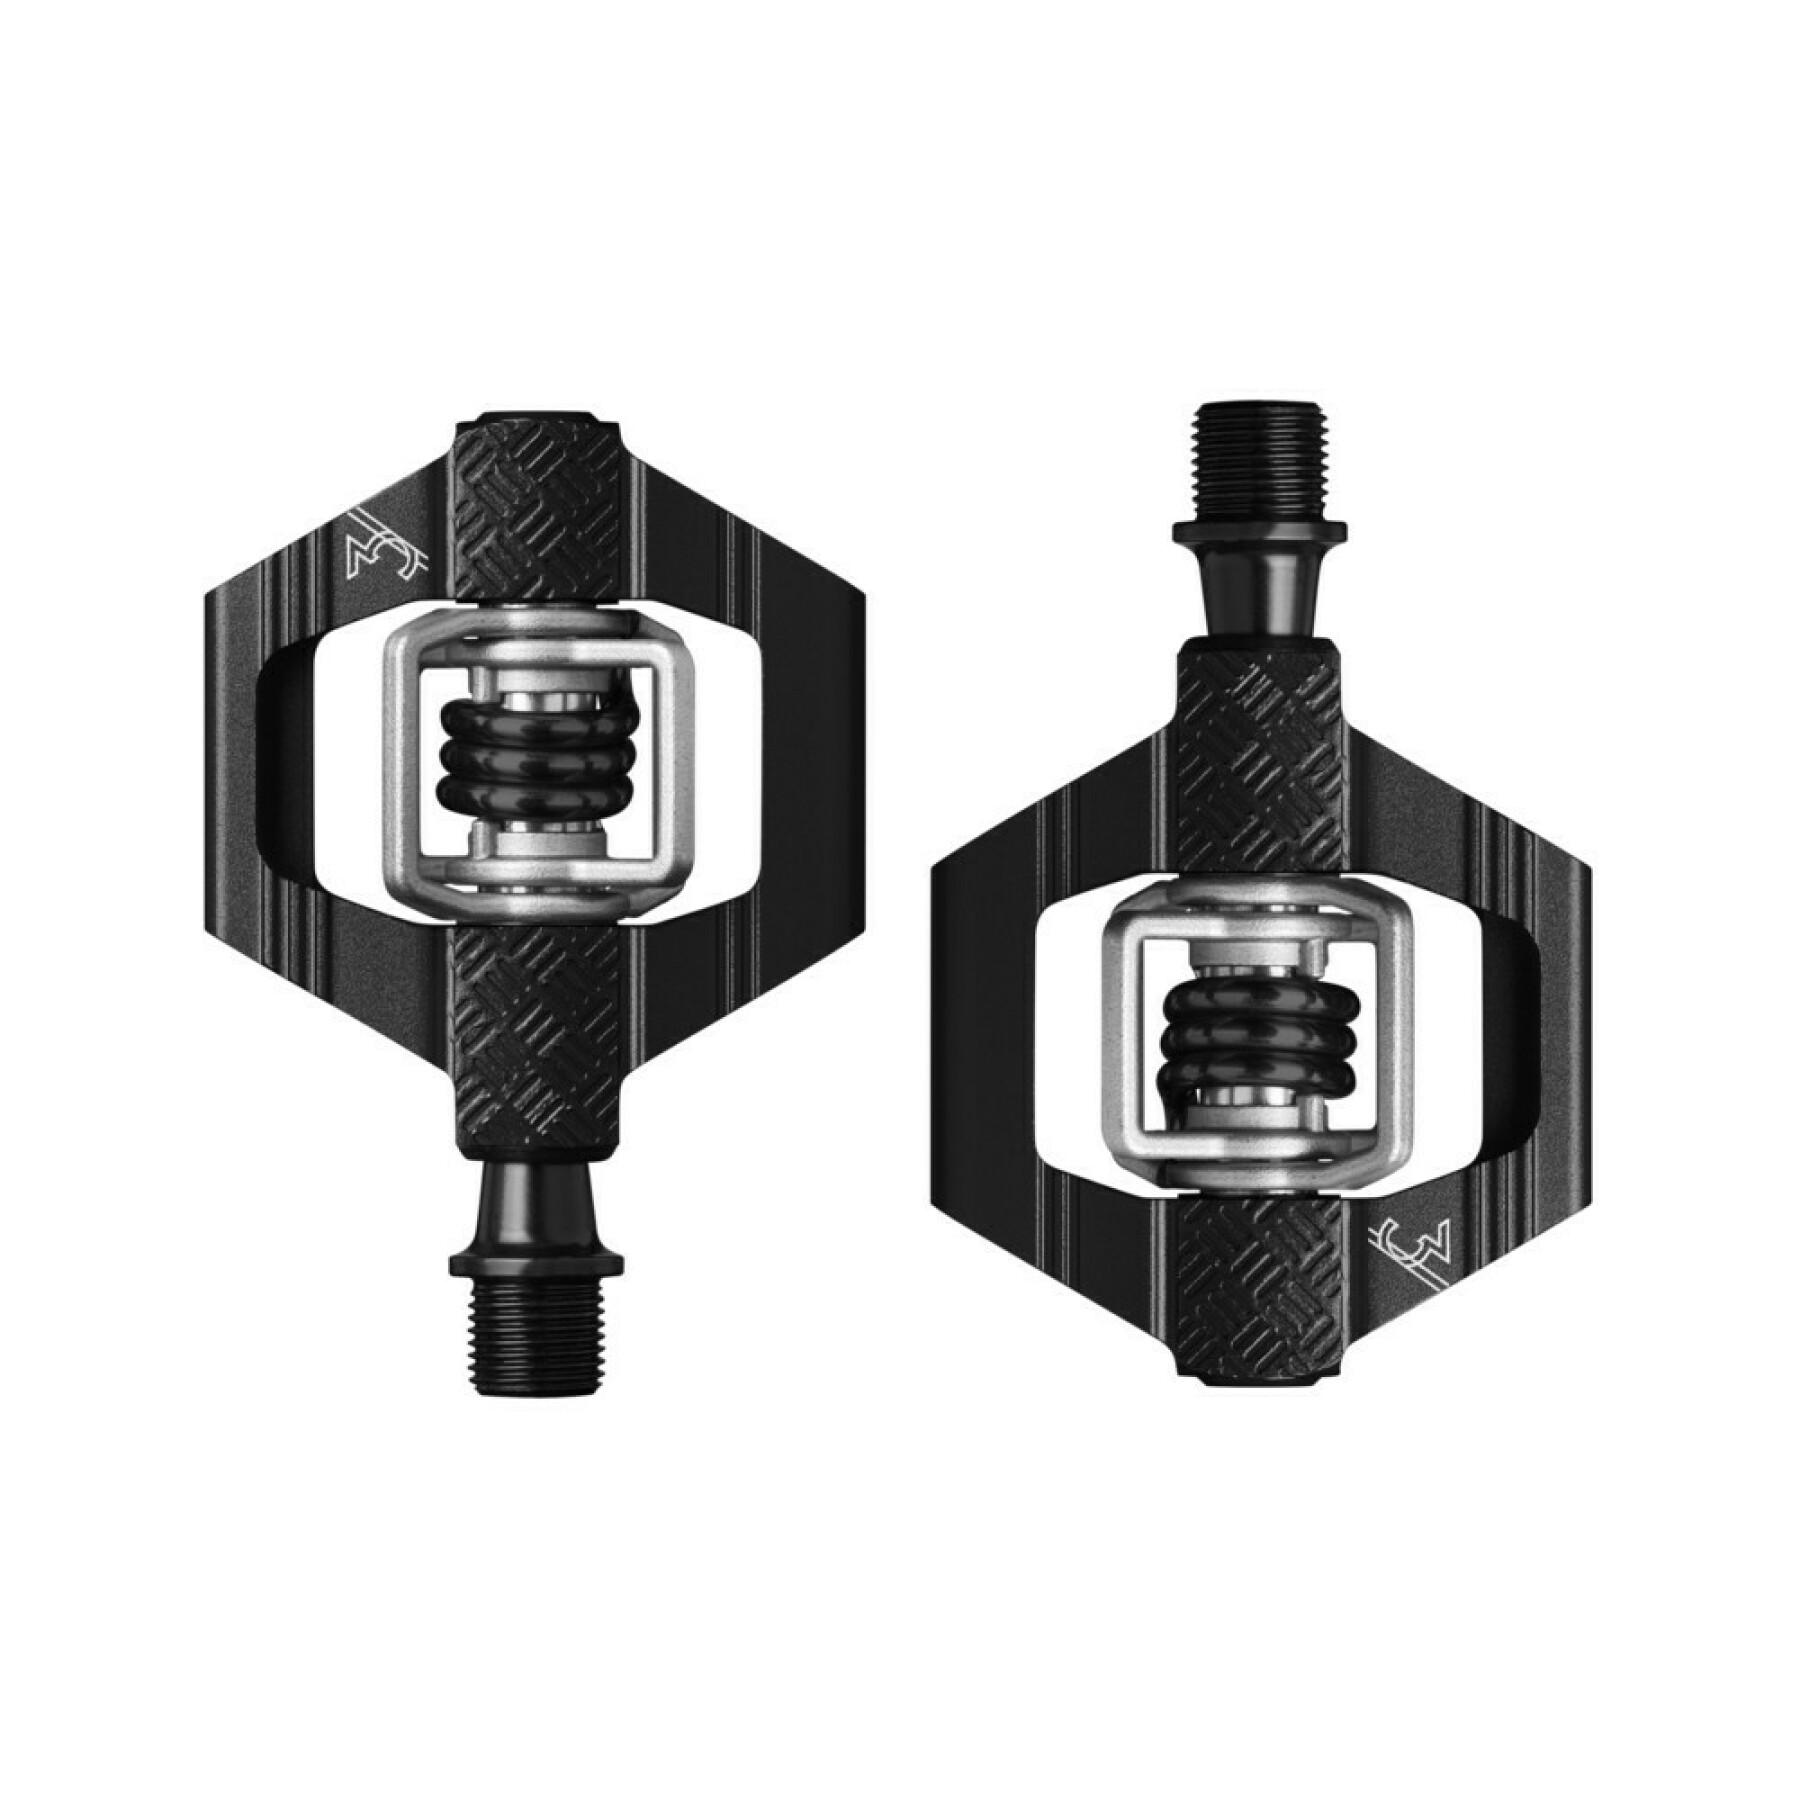 Pedais crankbrothers candy 2